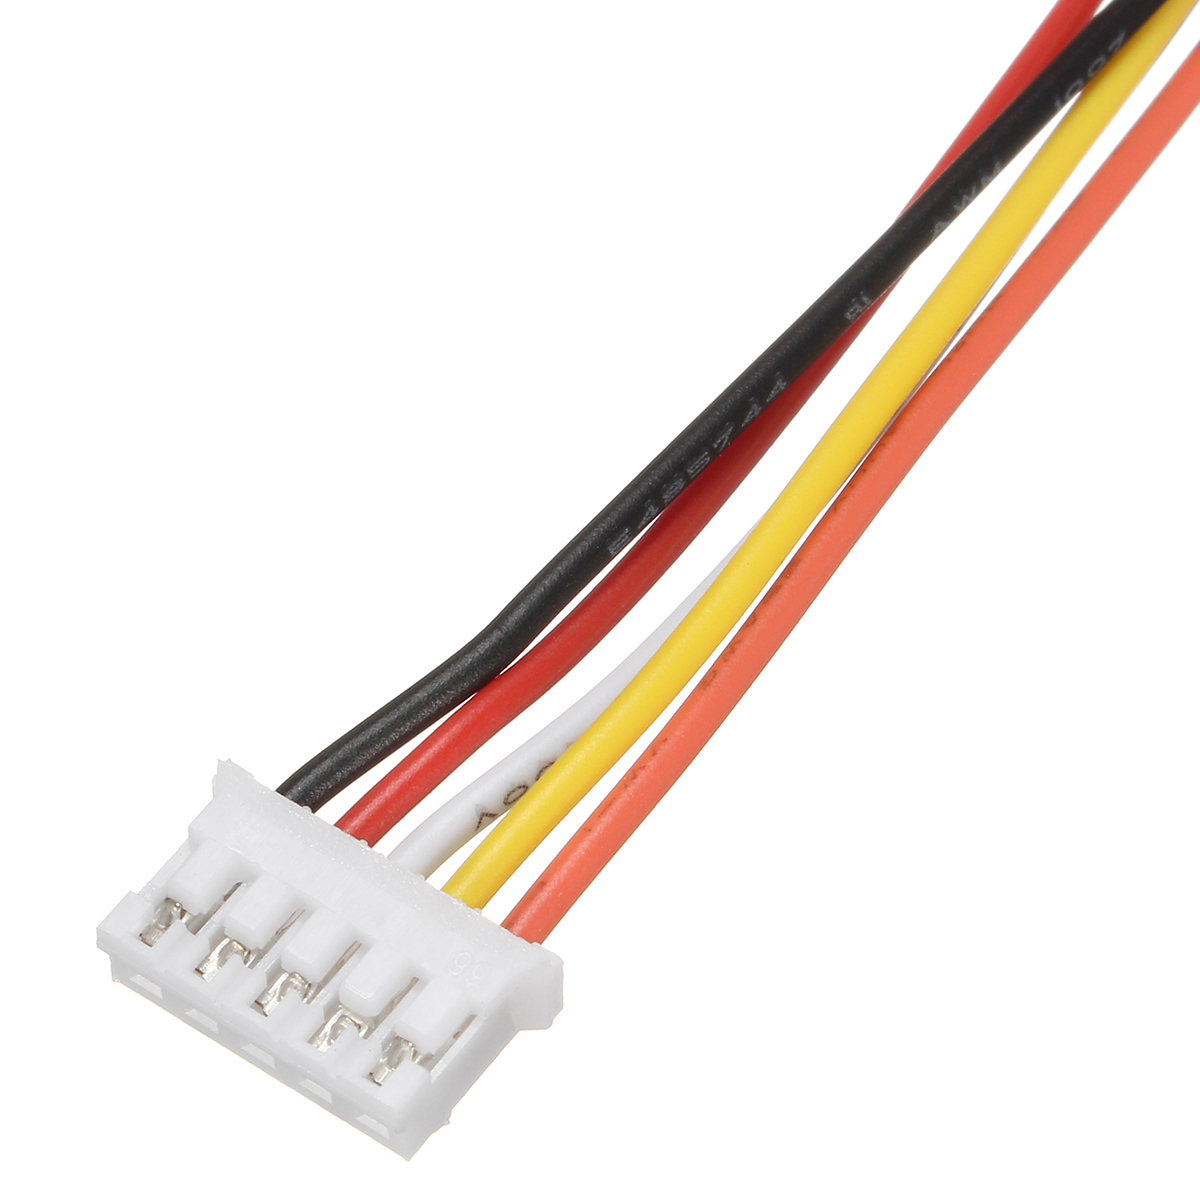 Excellwayreg-10Pcs-Mini-Micro-JST-20-PH-5Pin-Connector-Plug-With-30cm-Wires-Cables-1147293-6